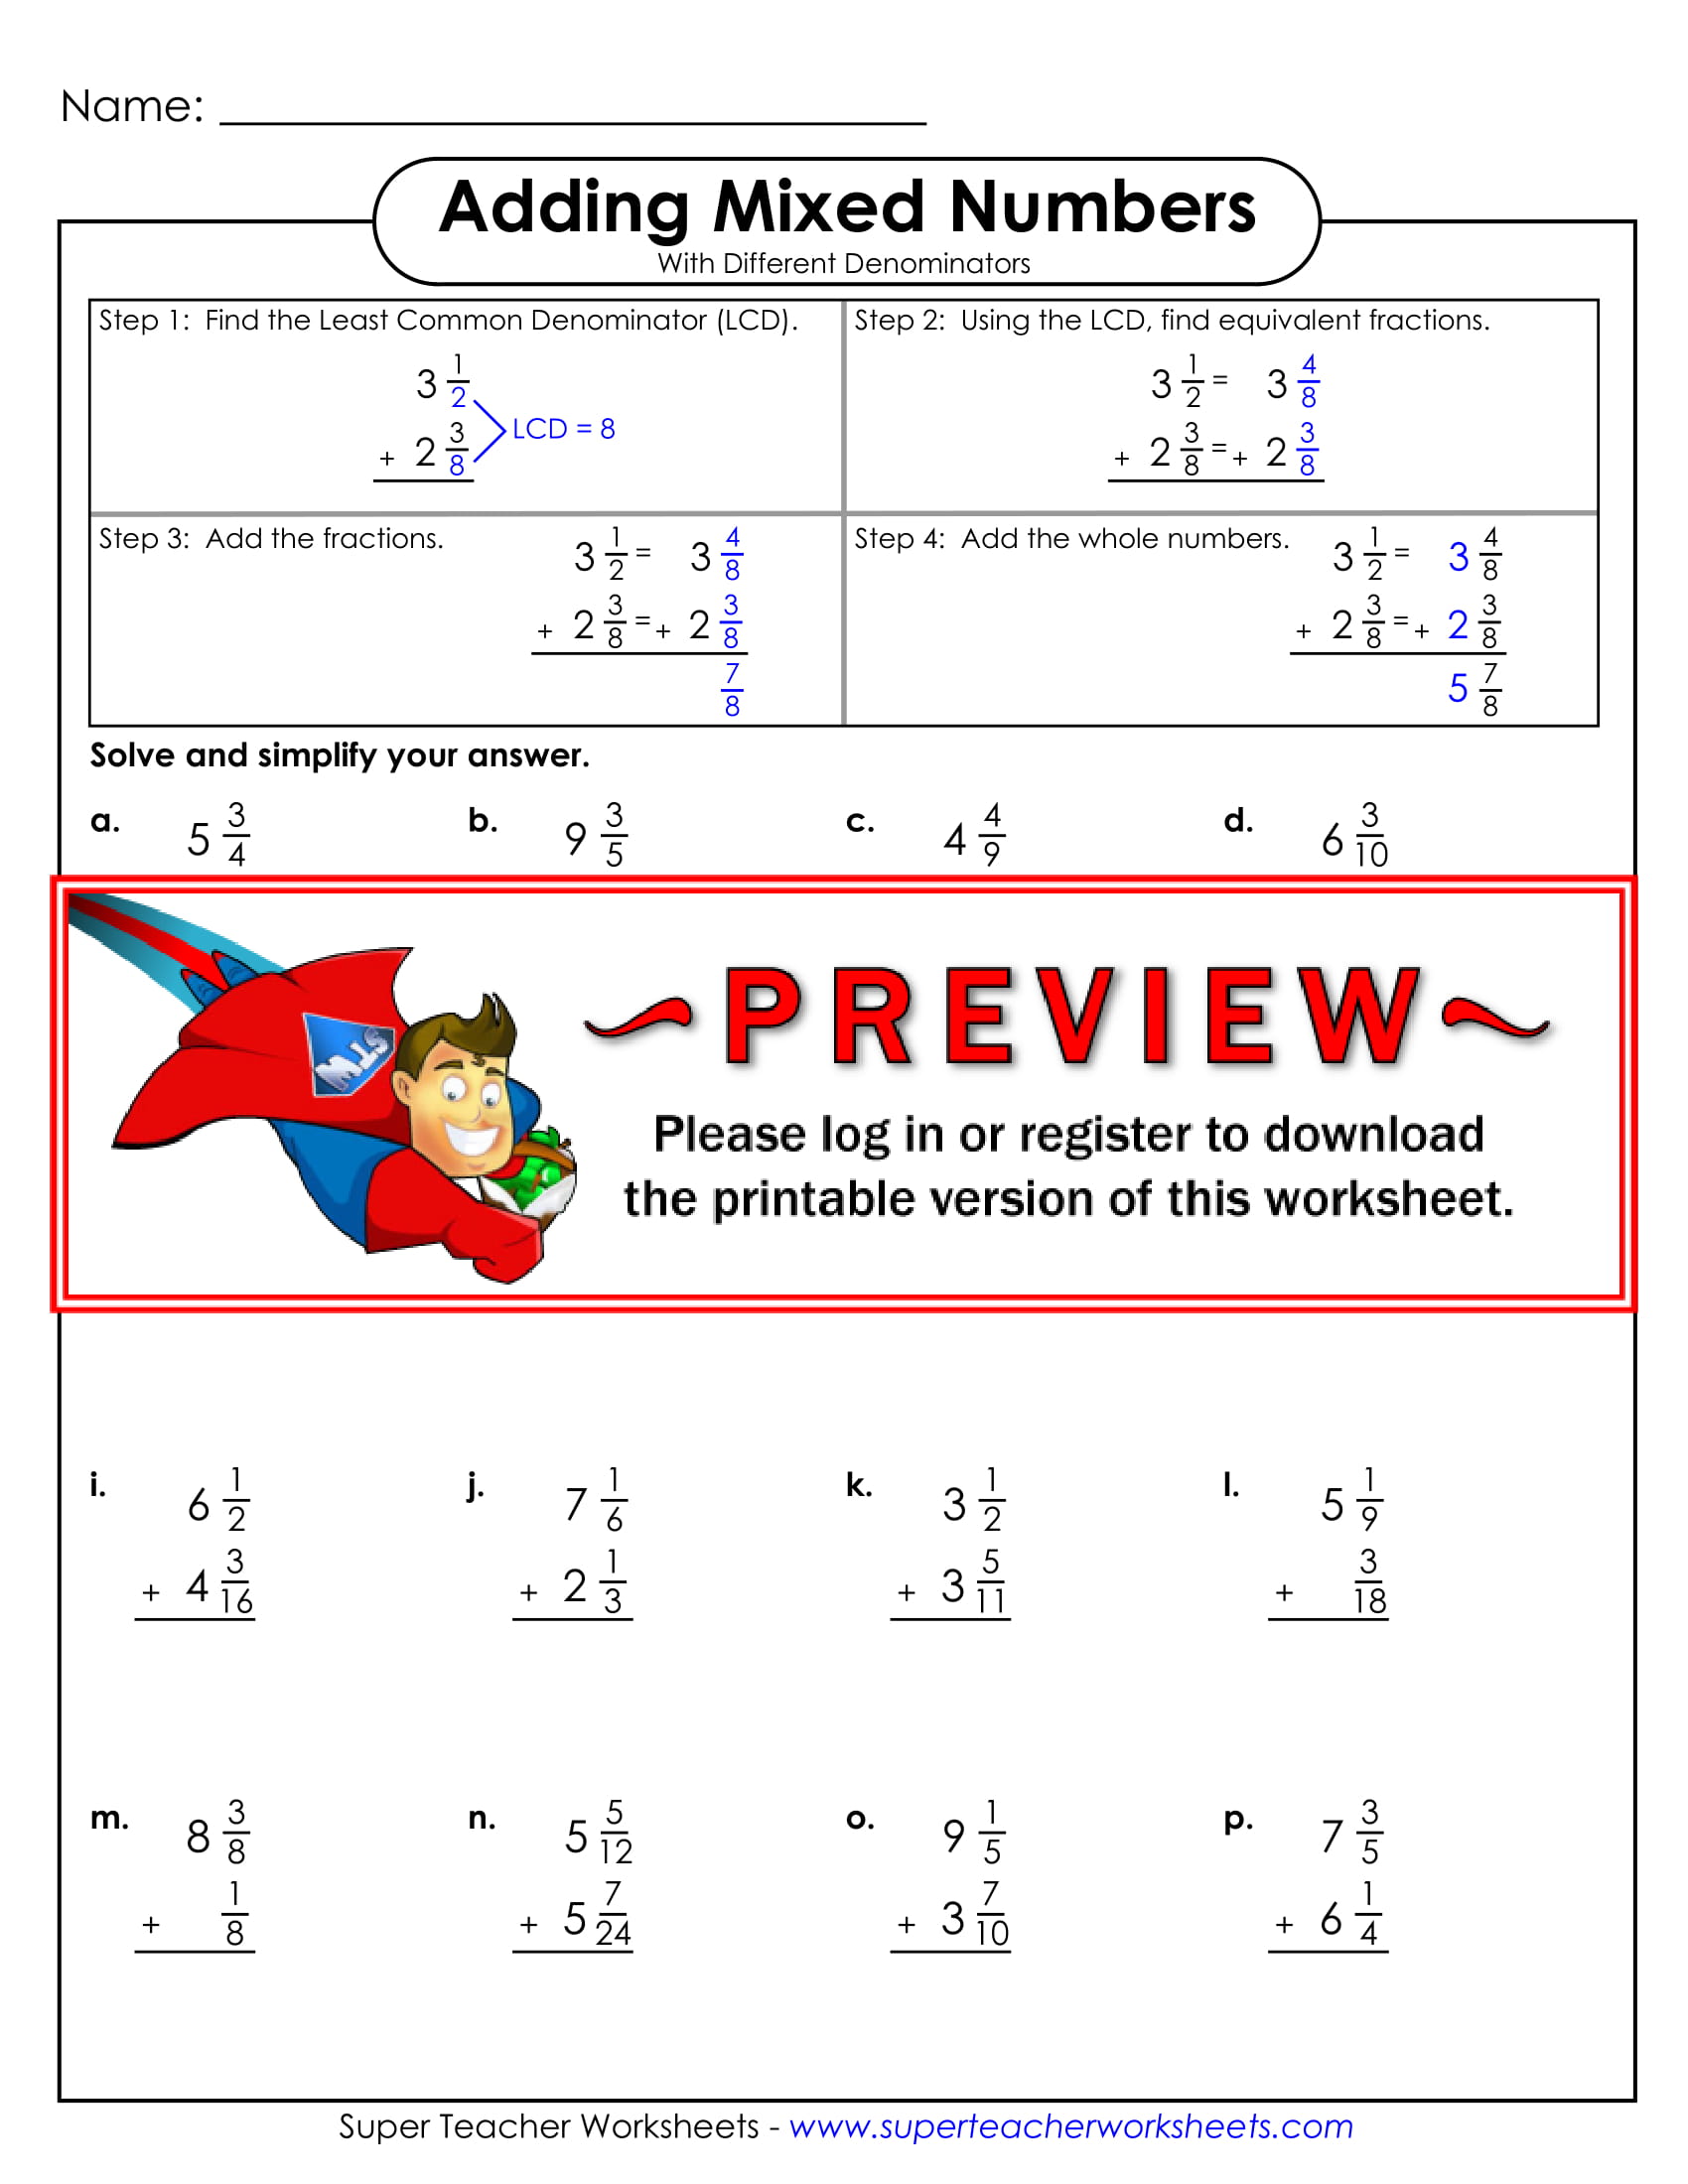 mixed-number-addition-worksheet